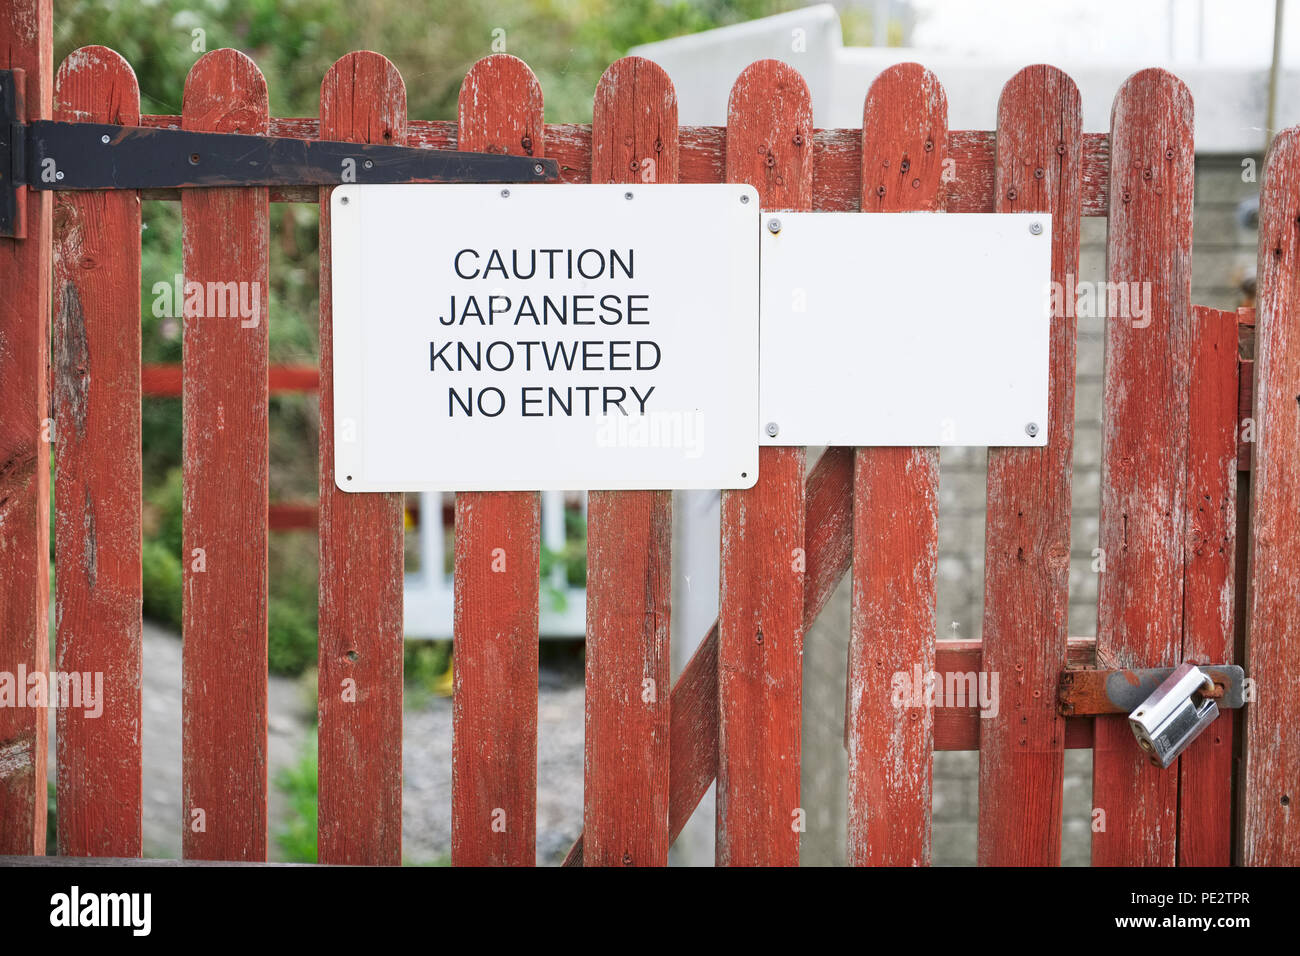 Japanese knotweed caution no entry sign on garden gate Stock Photo